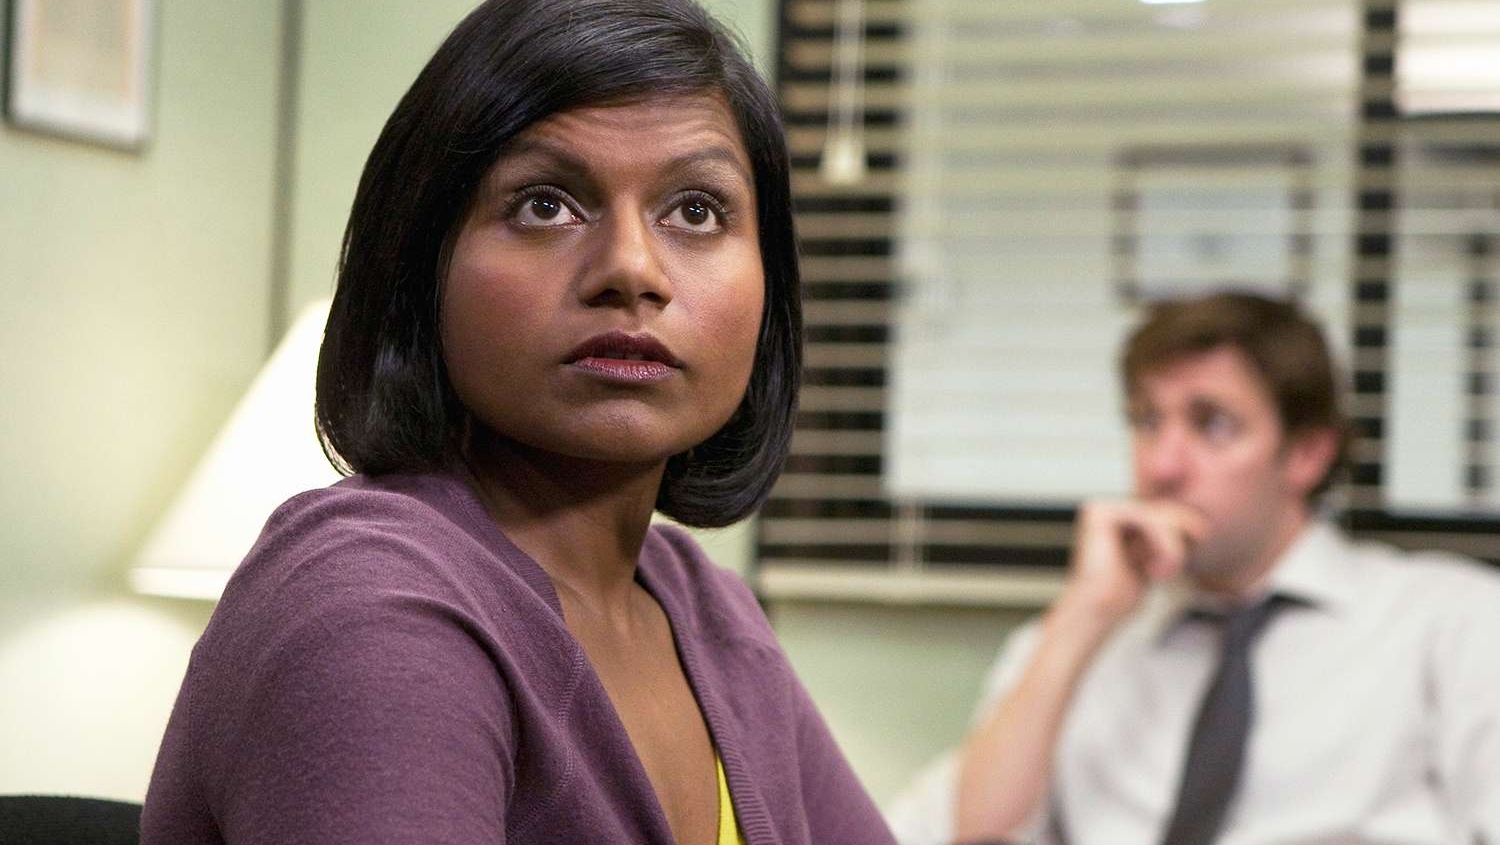 Mindy Kaling as Kelly Kapoor in 'The Office'.